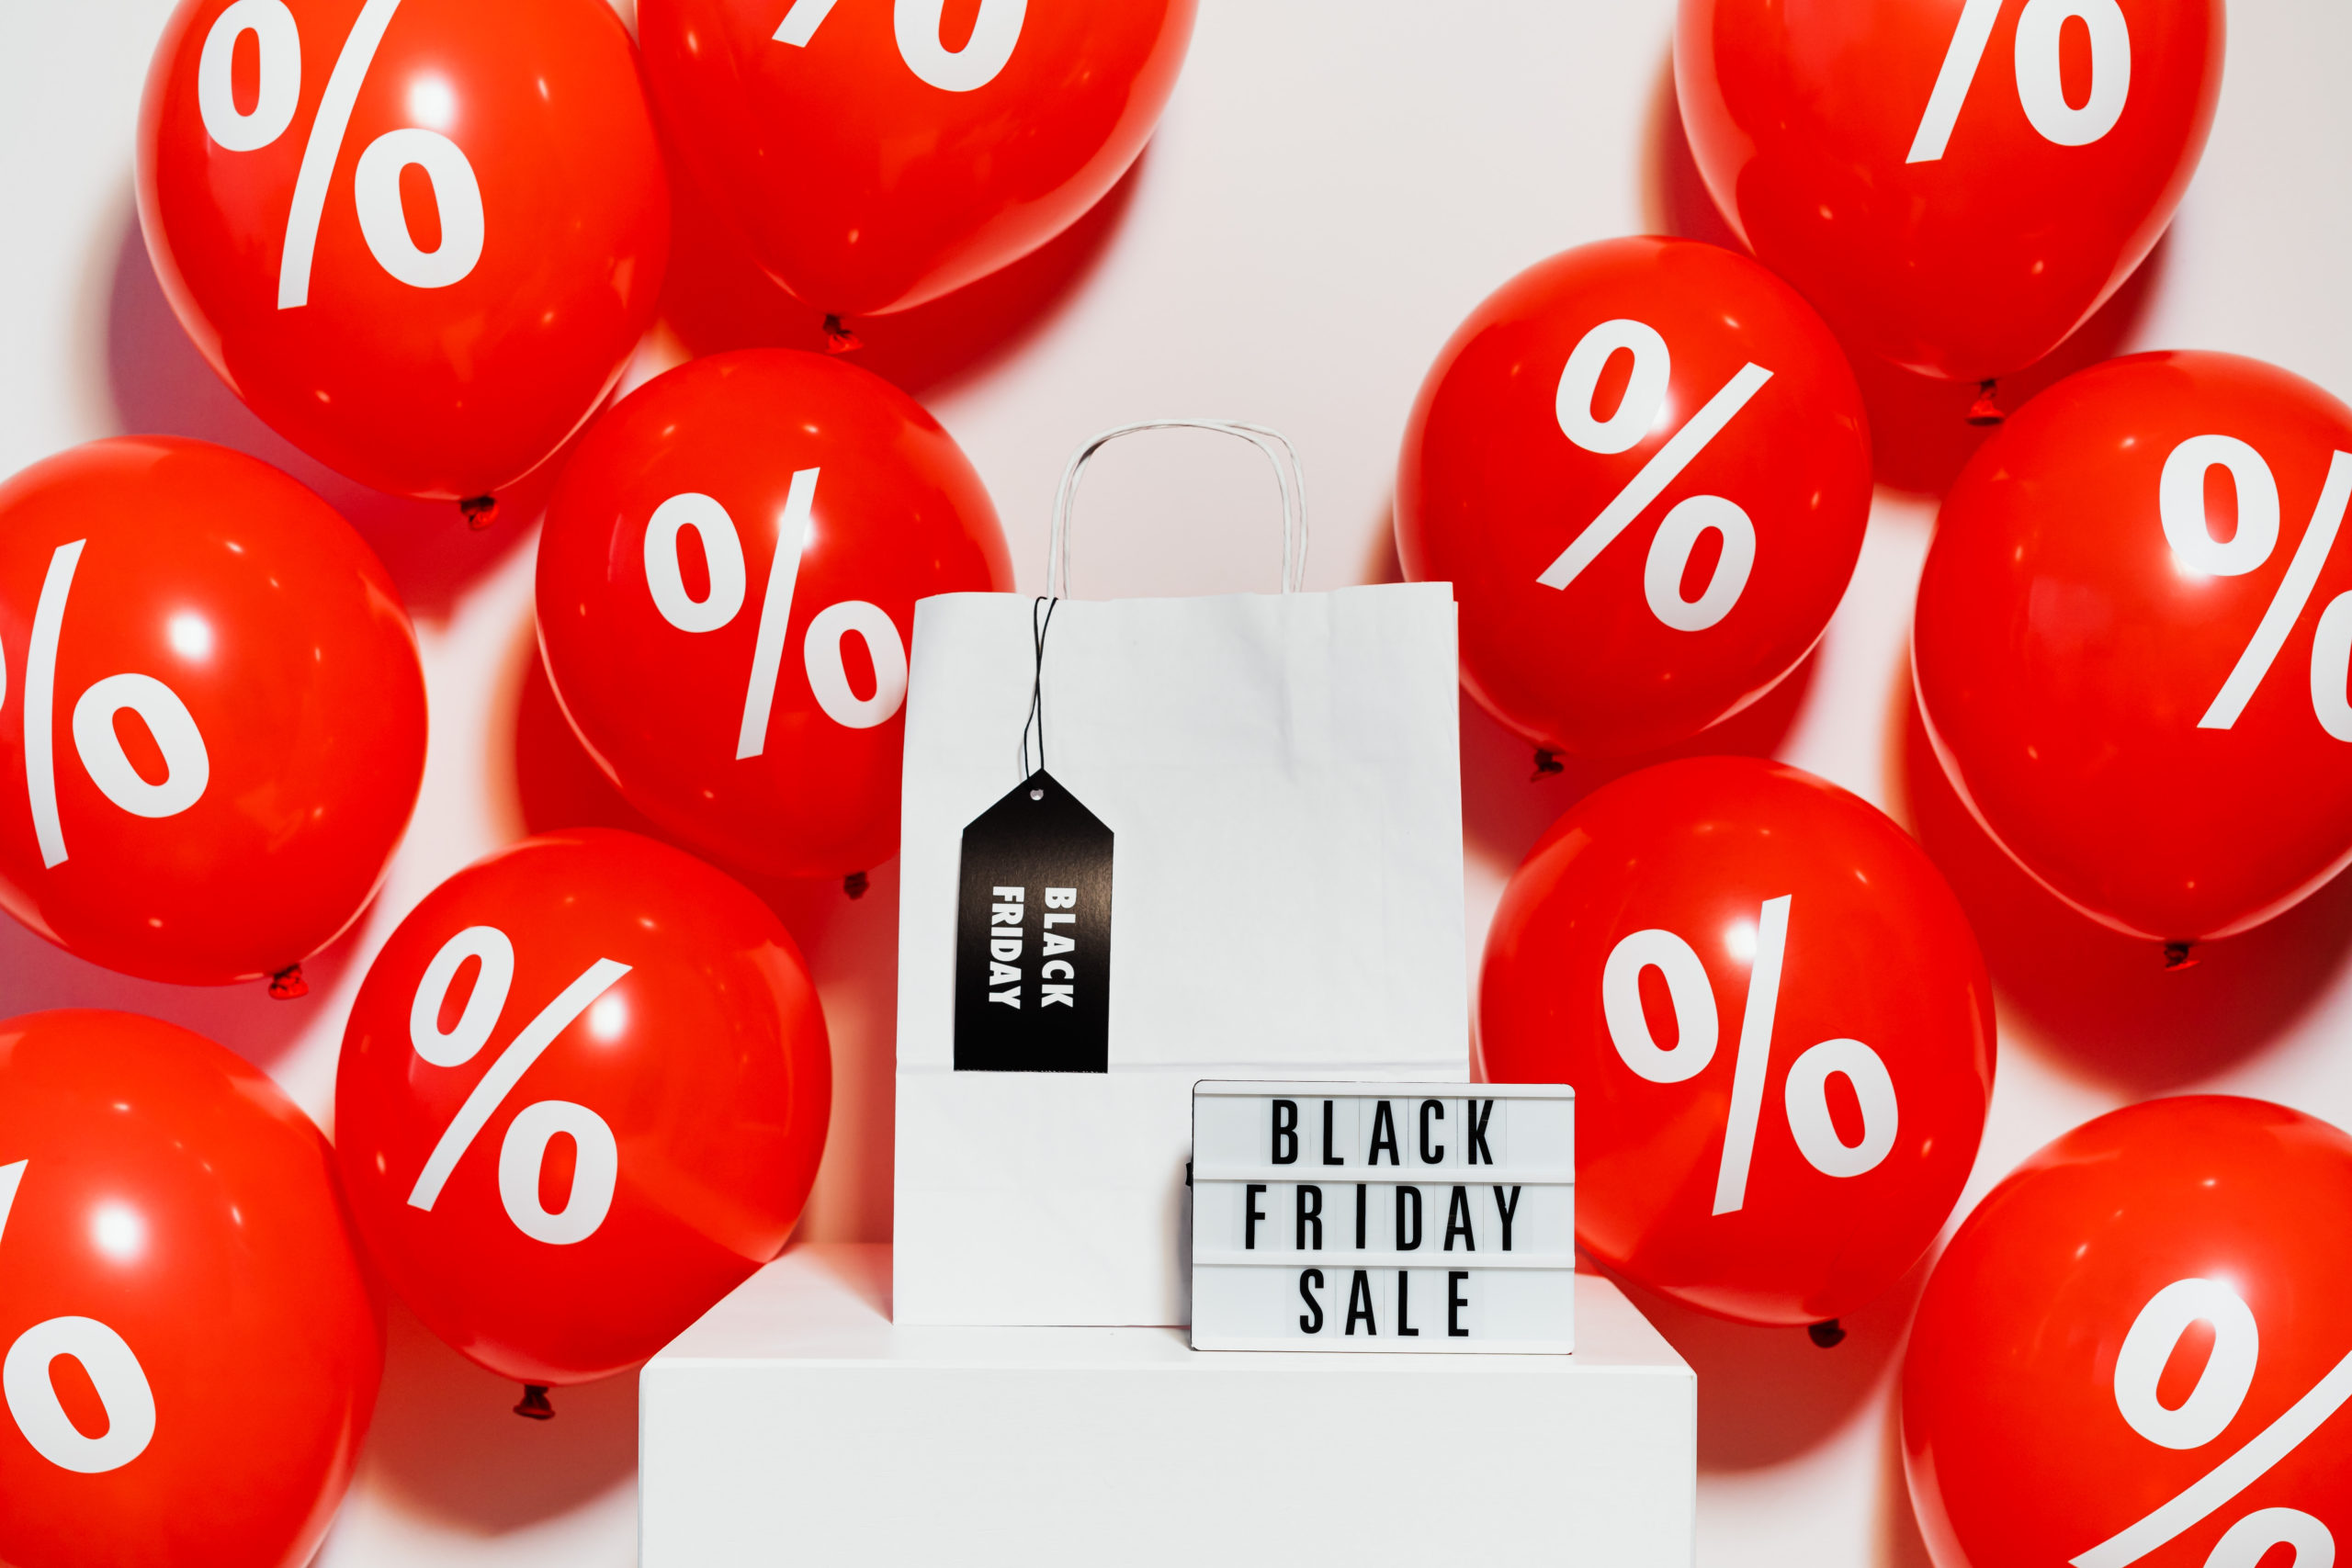 Are Thanksgiving Day Deals Better Than Black Friday Ones?